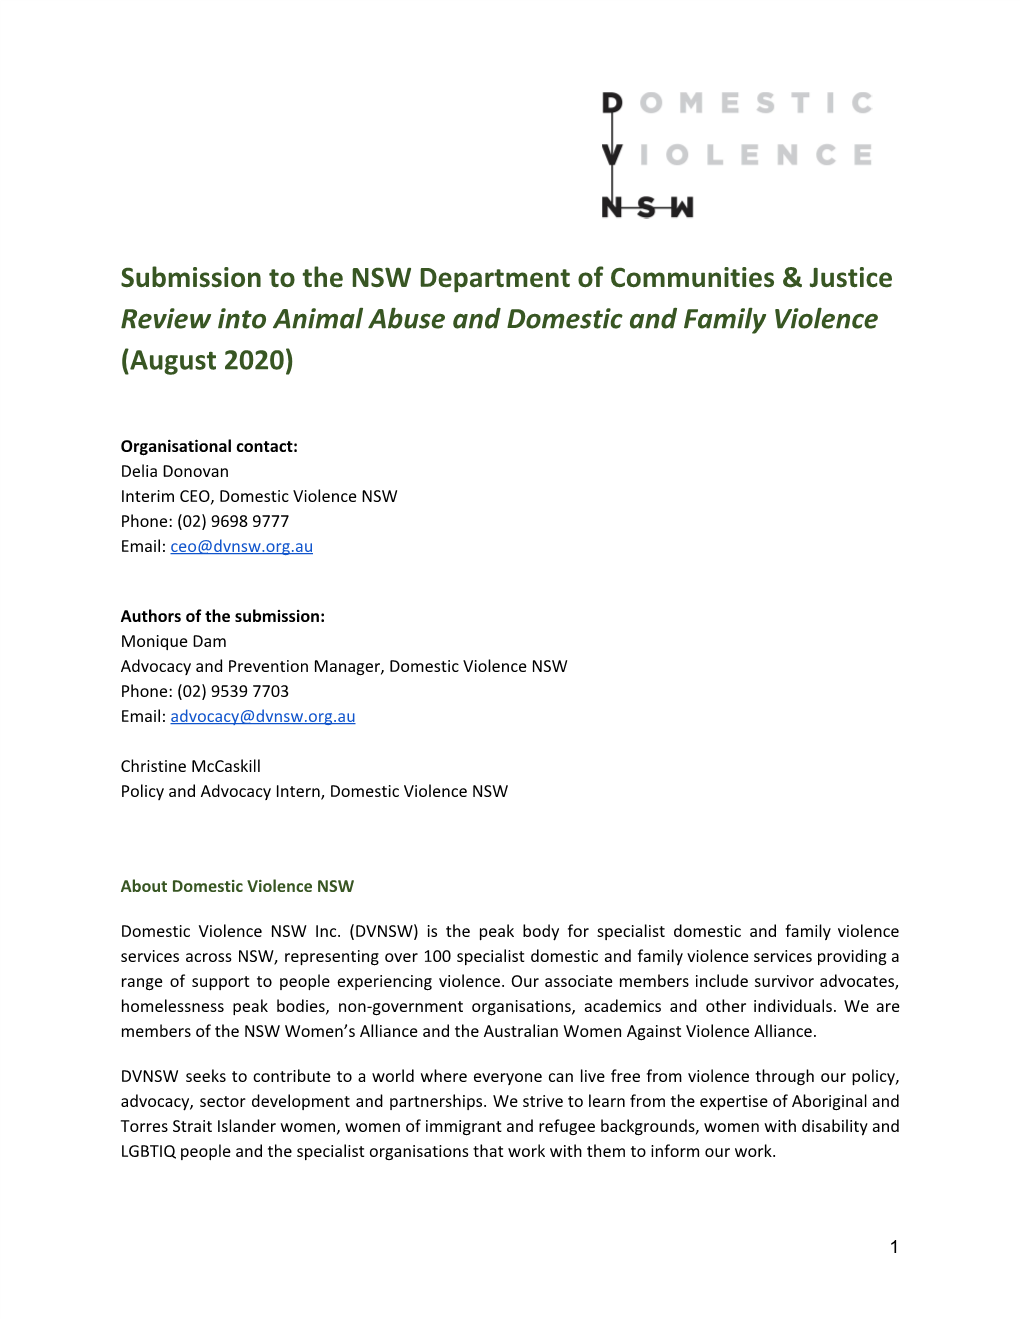 Review Into Animal Abuse and Domestic and Family Violence (August 2020)